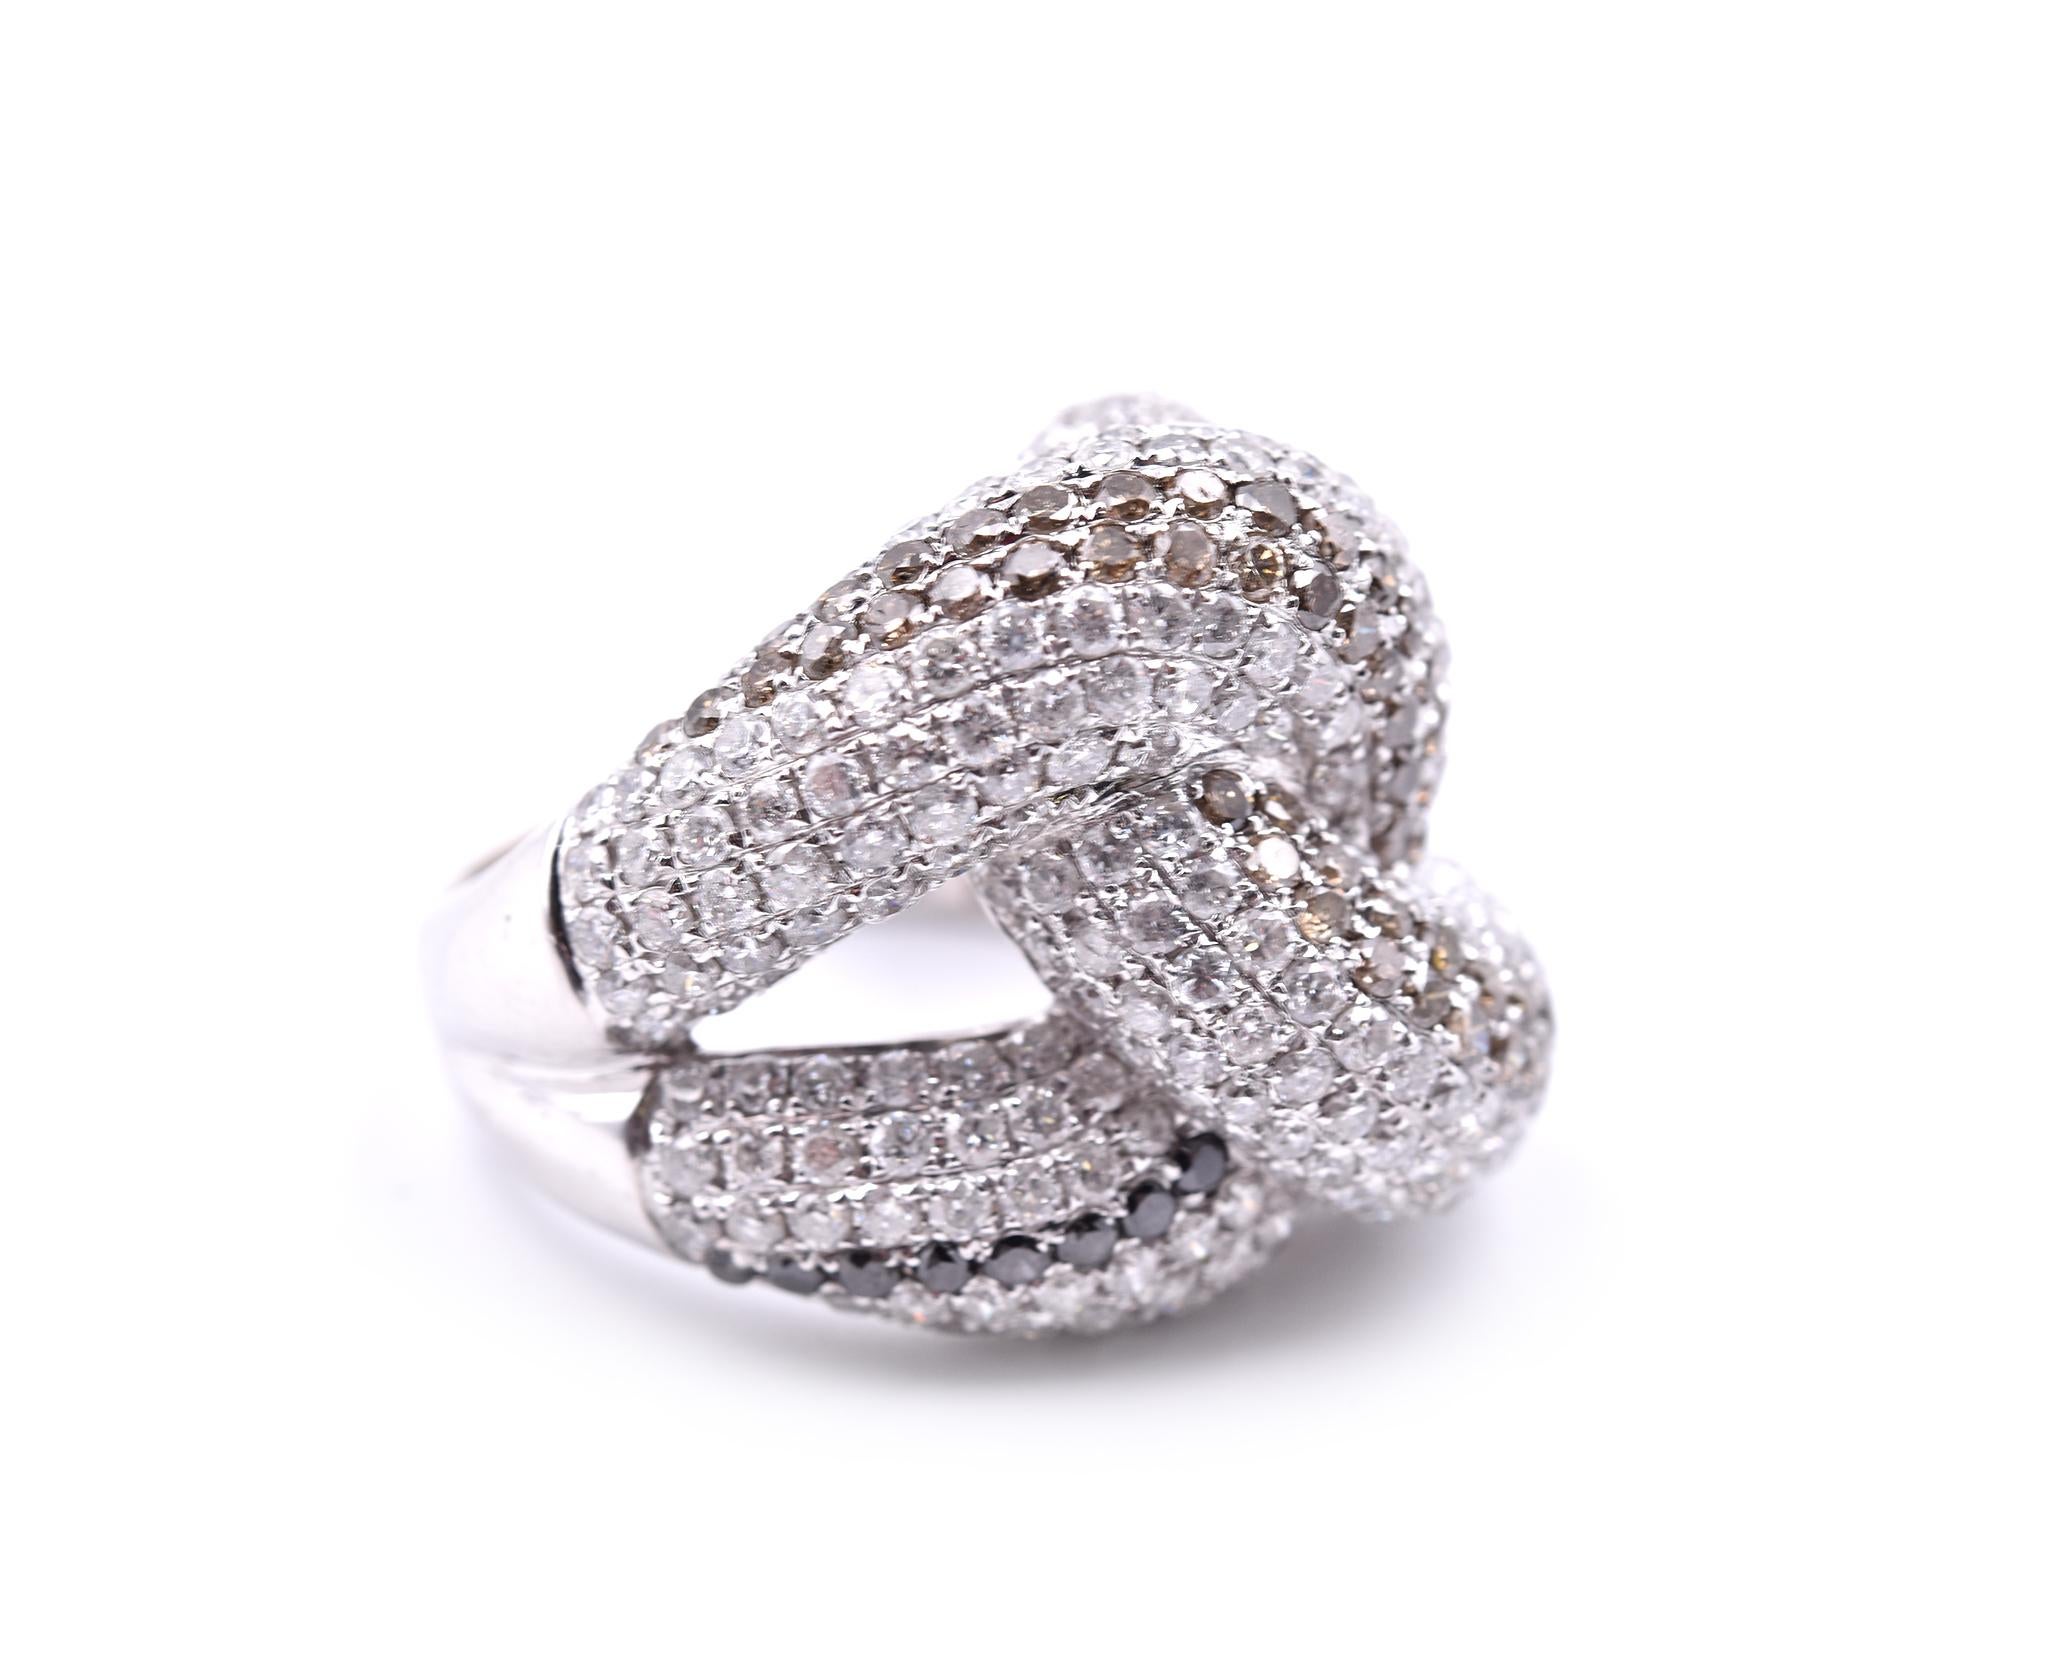 Designer: custom design
Material: 18k White Gold
Diamonds:  diamonds= 4.90cttw
Color: G-H	
Clarity: SI1
Ring size: 6 ¾ (please allow two additional shipping days for sizing requests) 
Dimensions: band is 20.75mm 
Weight: 14.98 grams
